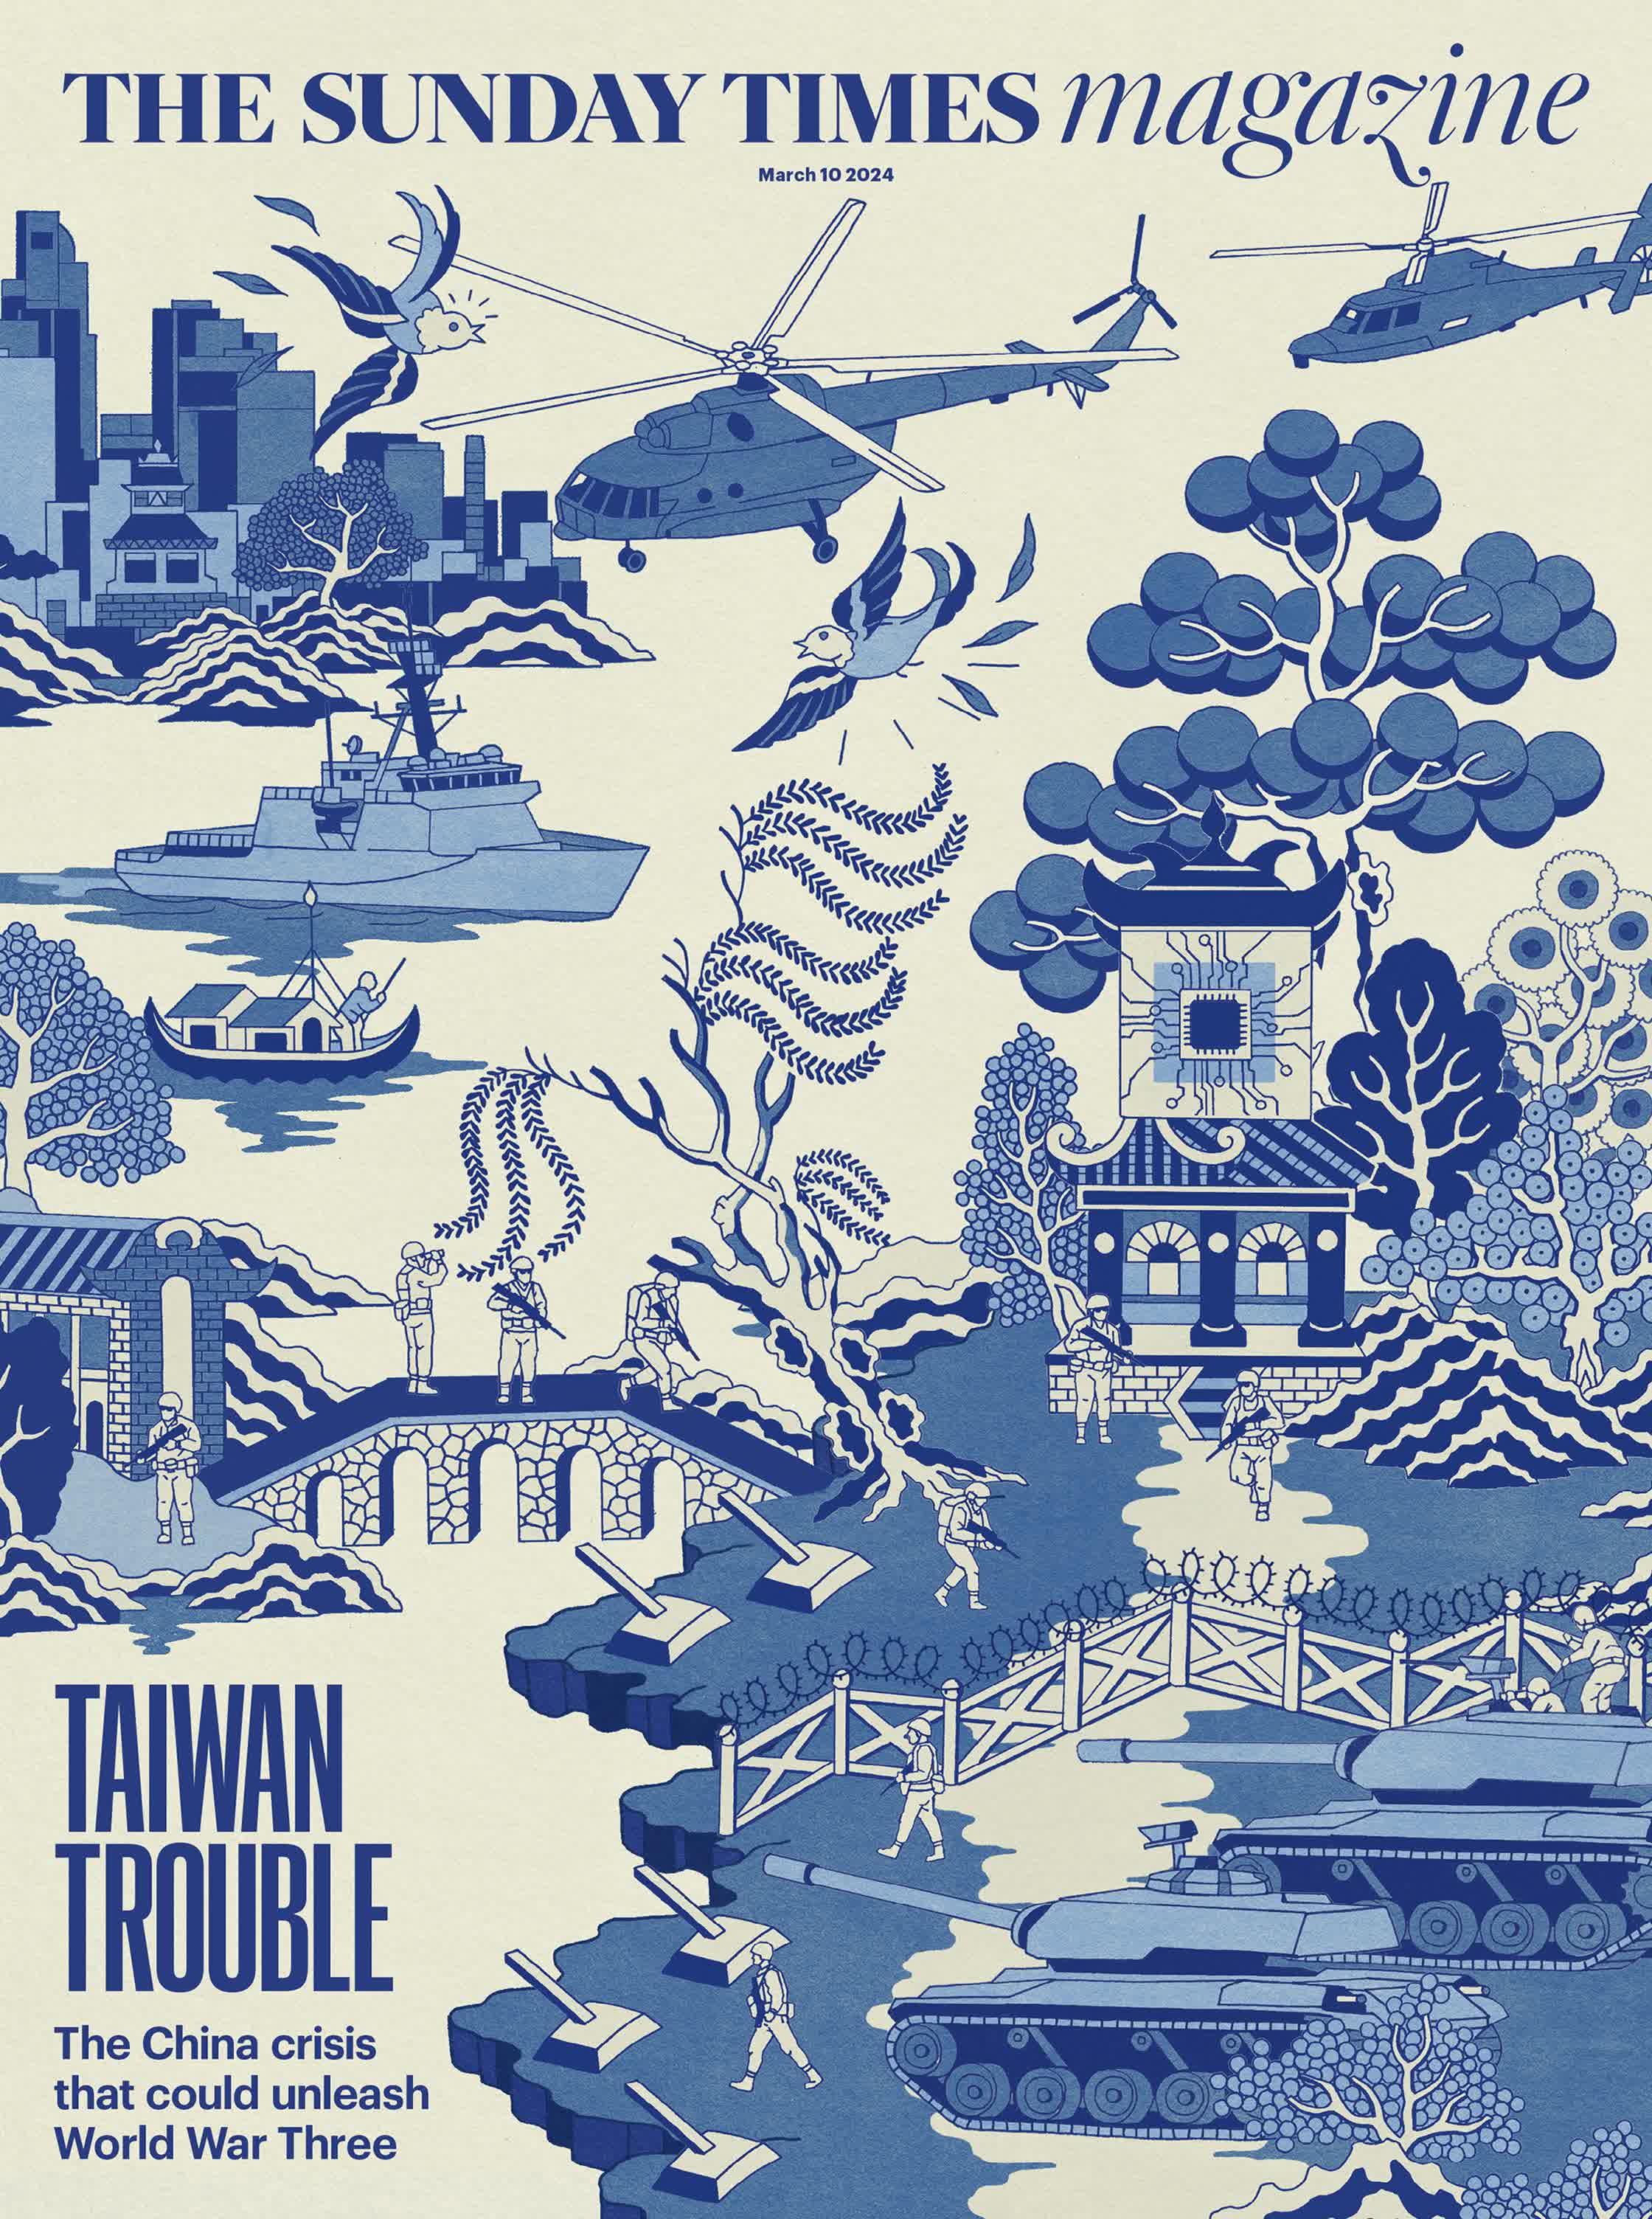 SUNDAY TIMES MAGAINE - TROUBLE IN TAIWAN COVER - with title.jpg